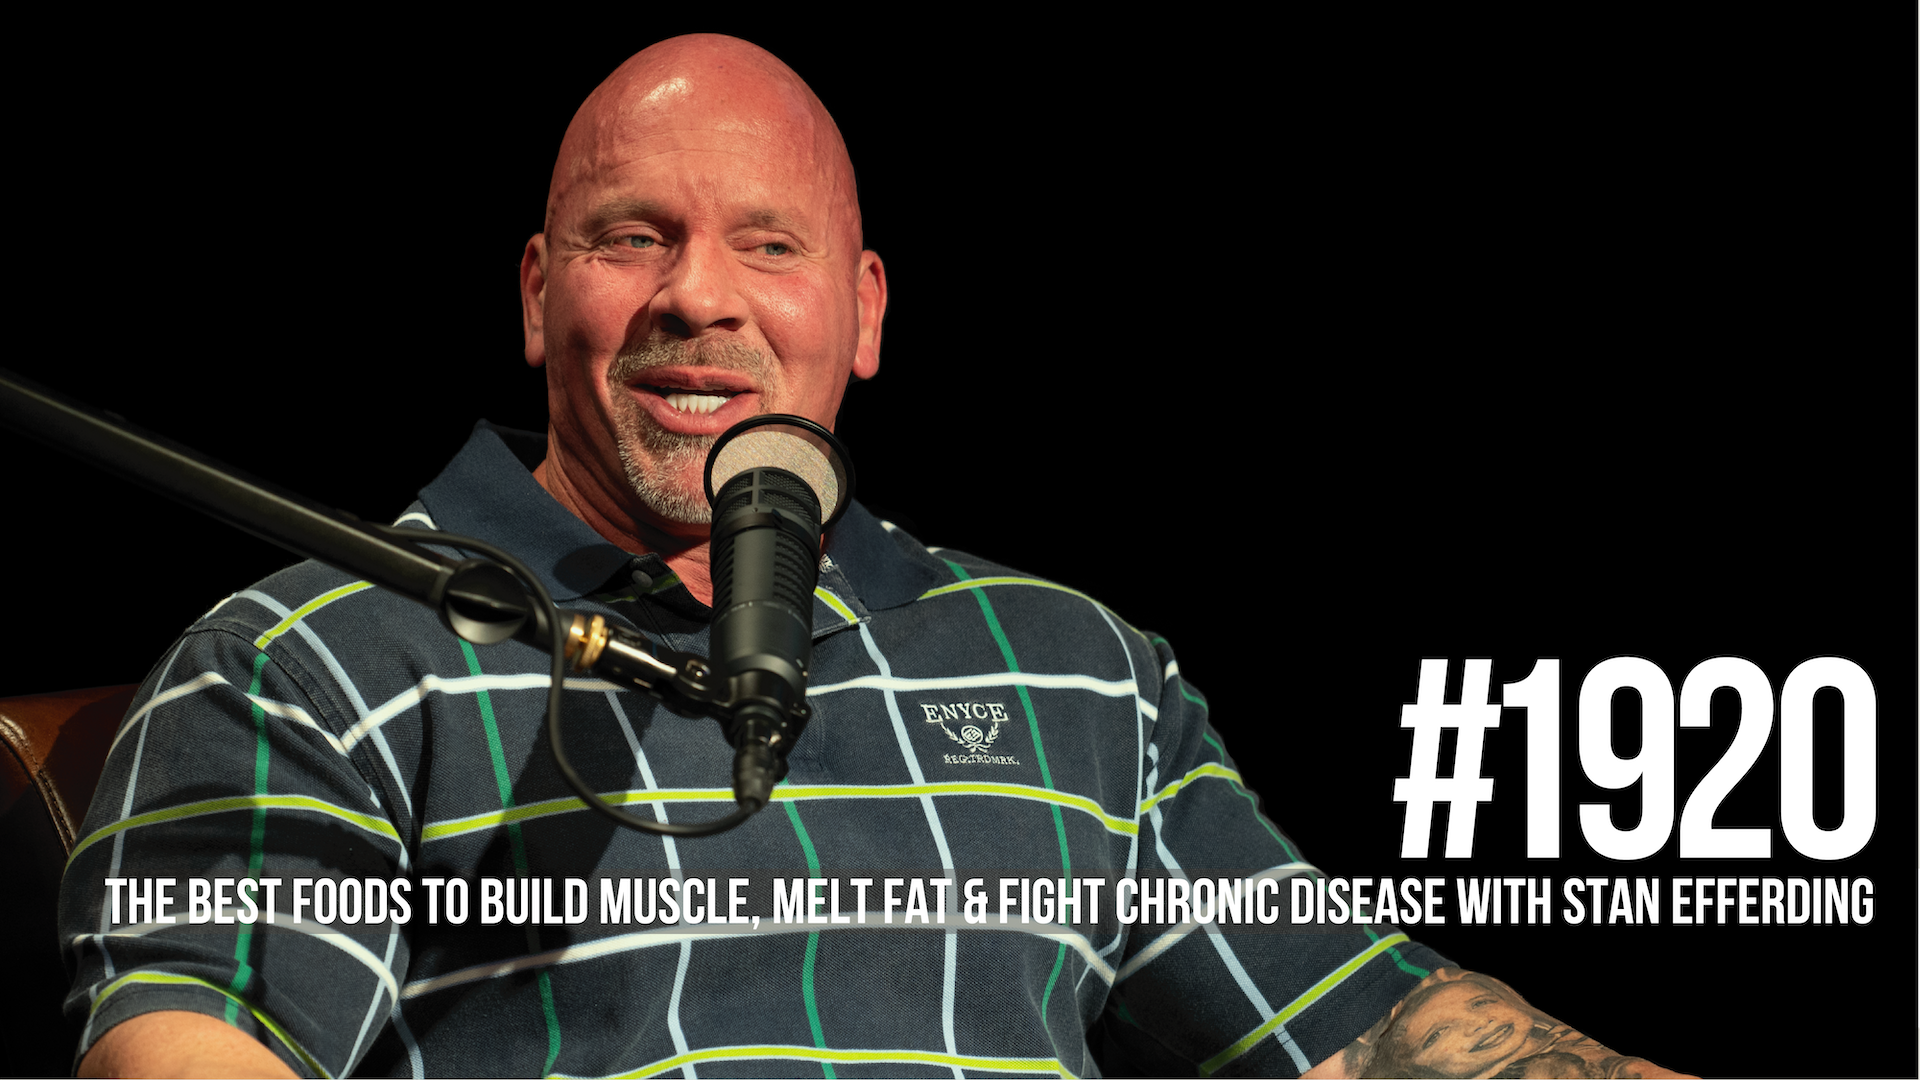 1920: The Best Foods to Build Muscle, Melt Fat & Fight Chronic Disease With Stan Efferding